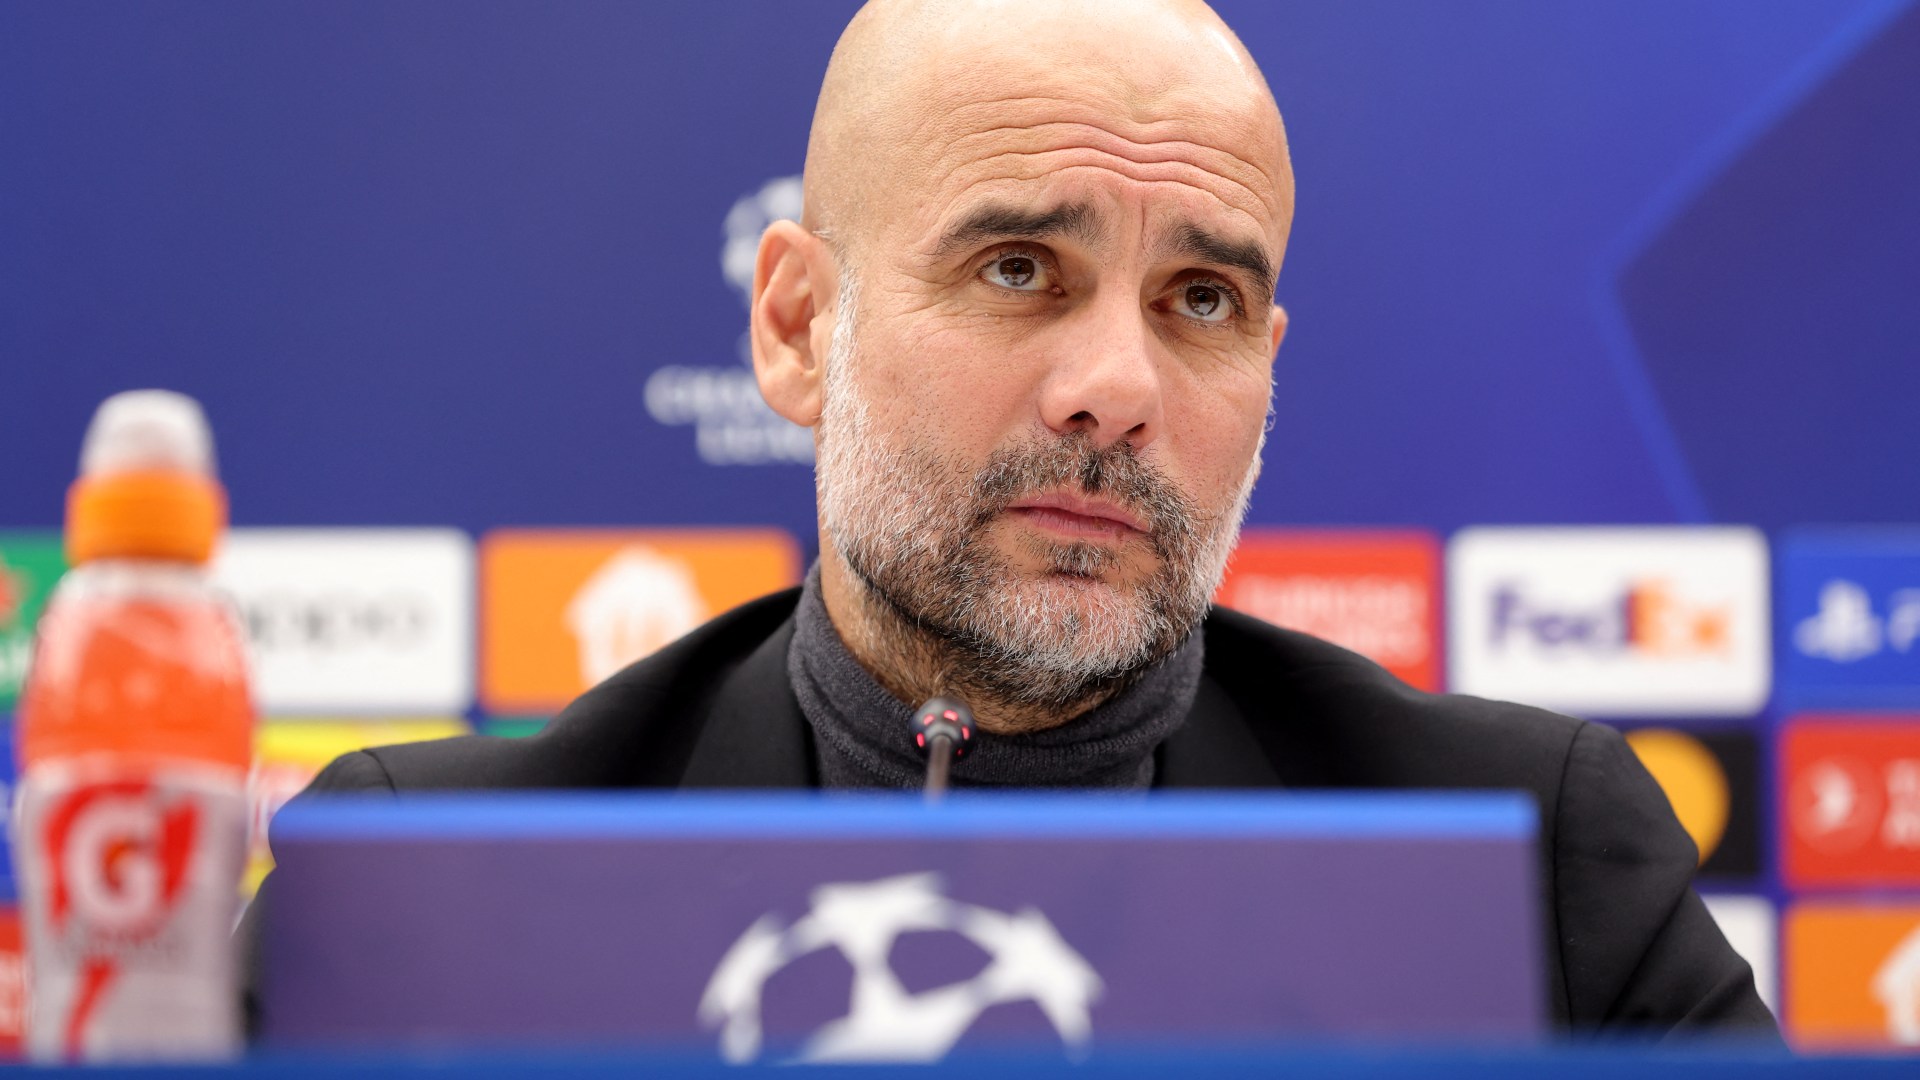 Pep Guardiola has brilliant response after learning Man City wonderkid Micah Hamilton was ballboy for him six years ago